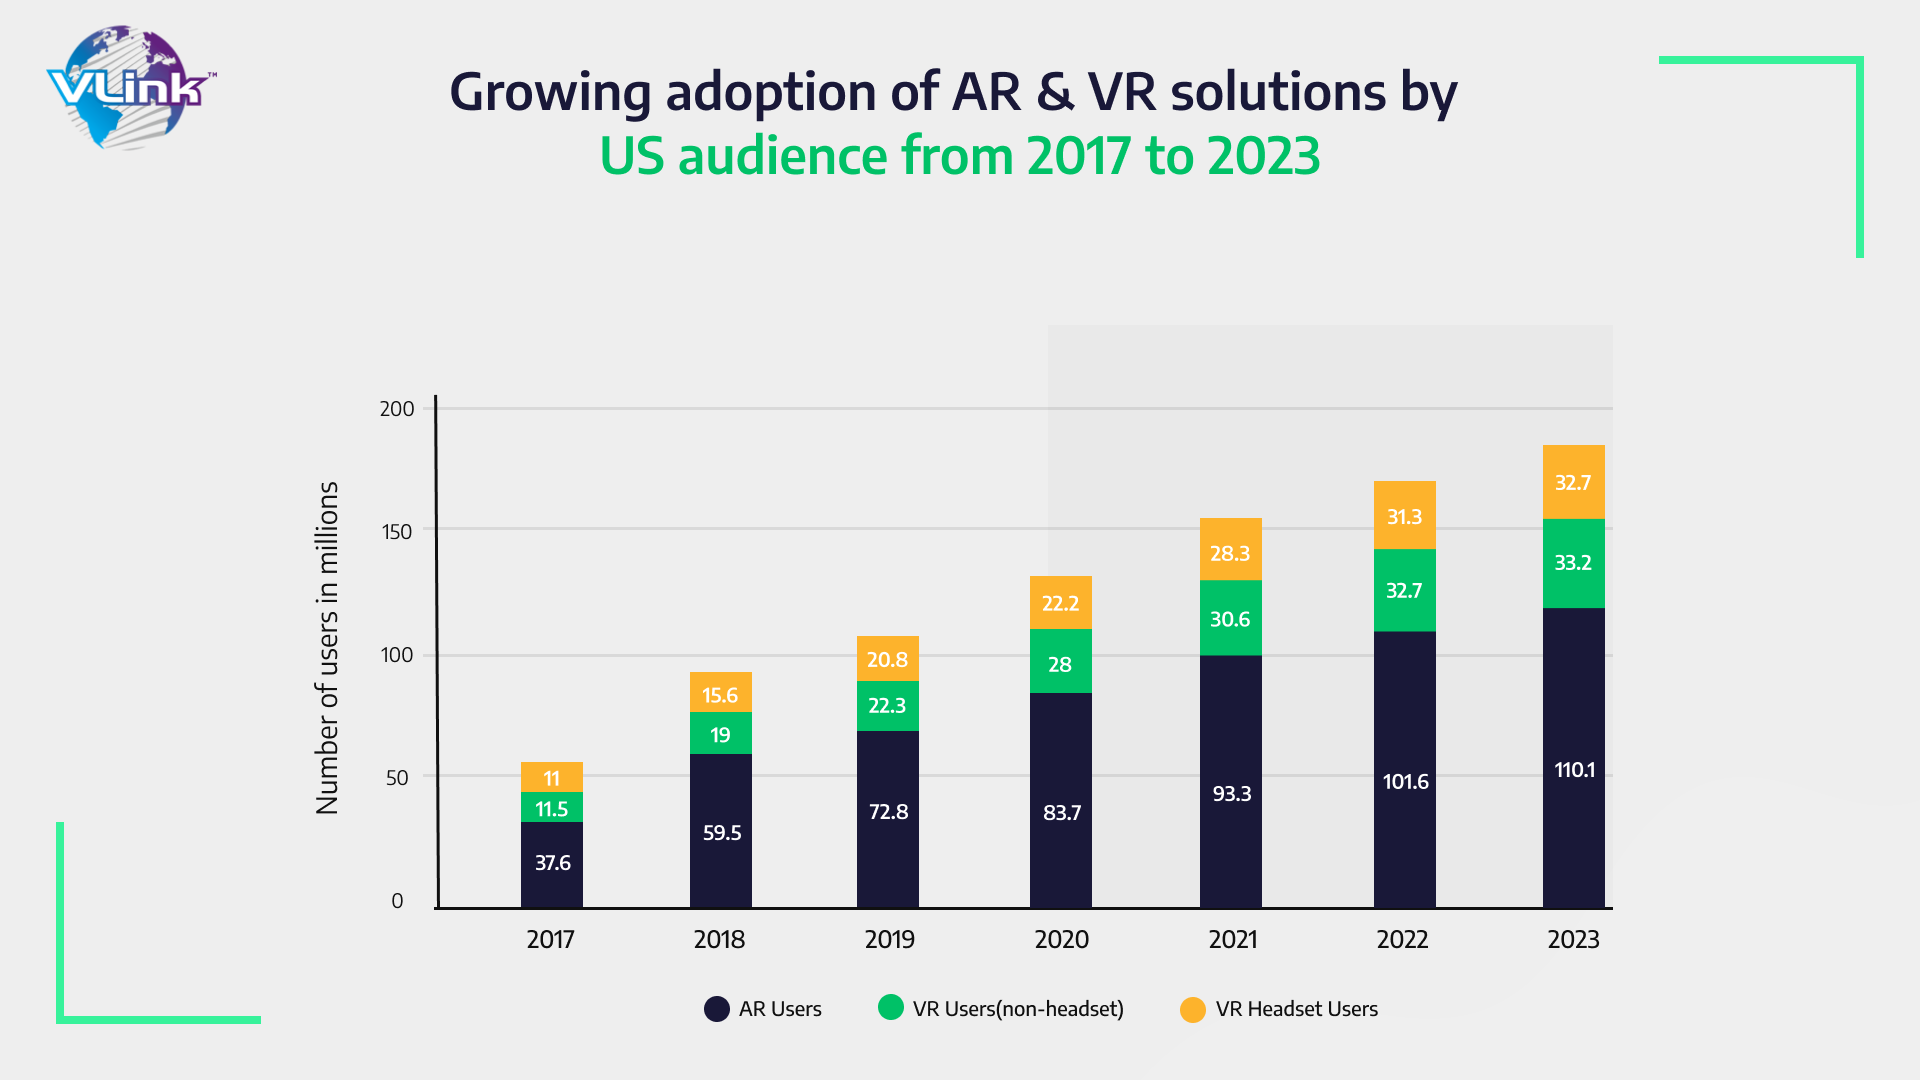 Growing adoption of AR & VR solutions by US audience from 2017 to 2023